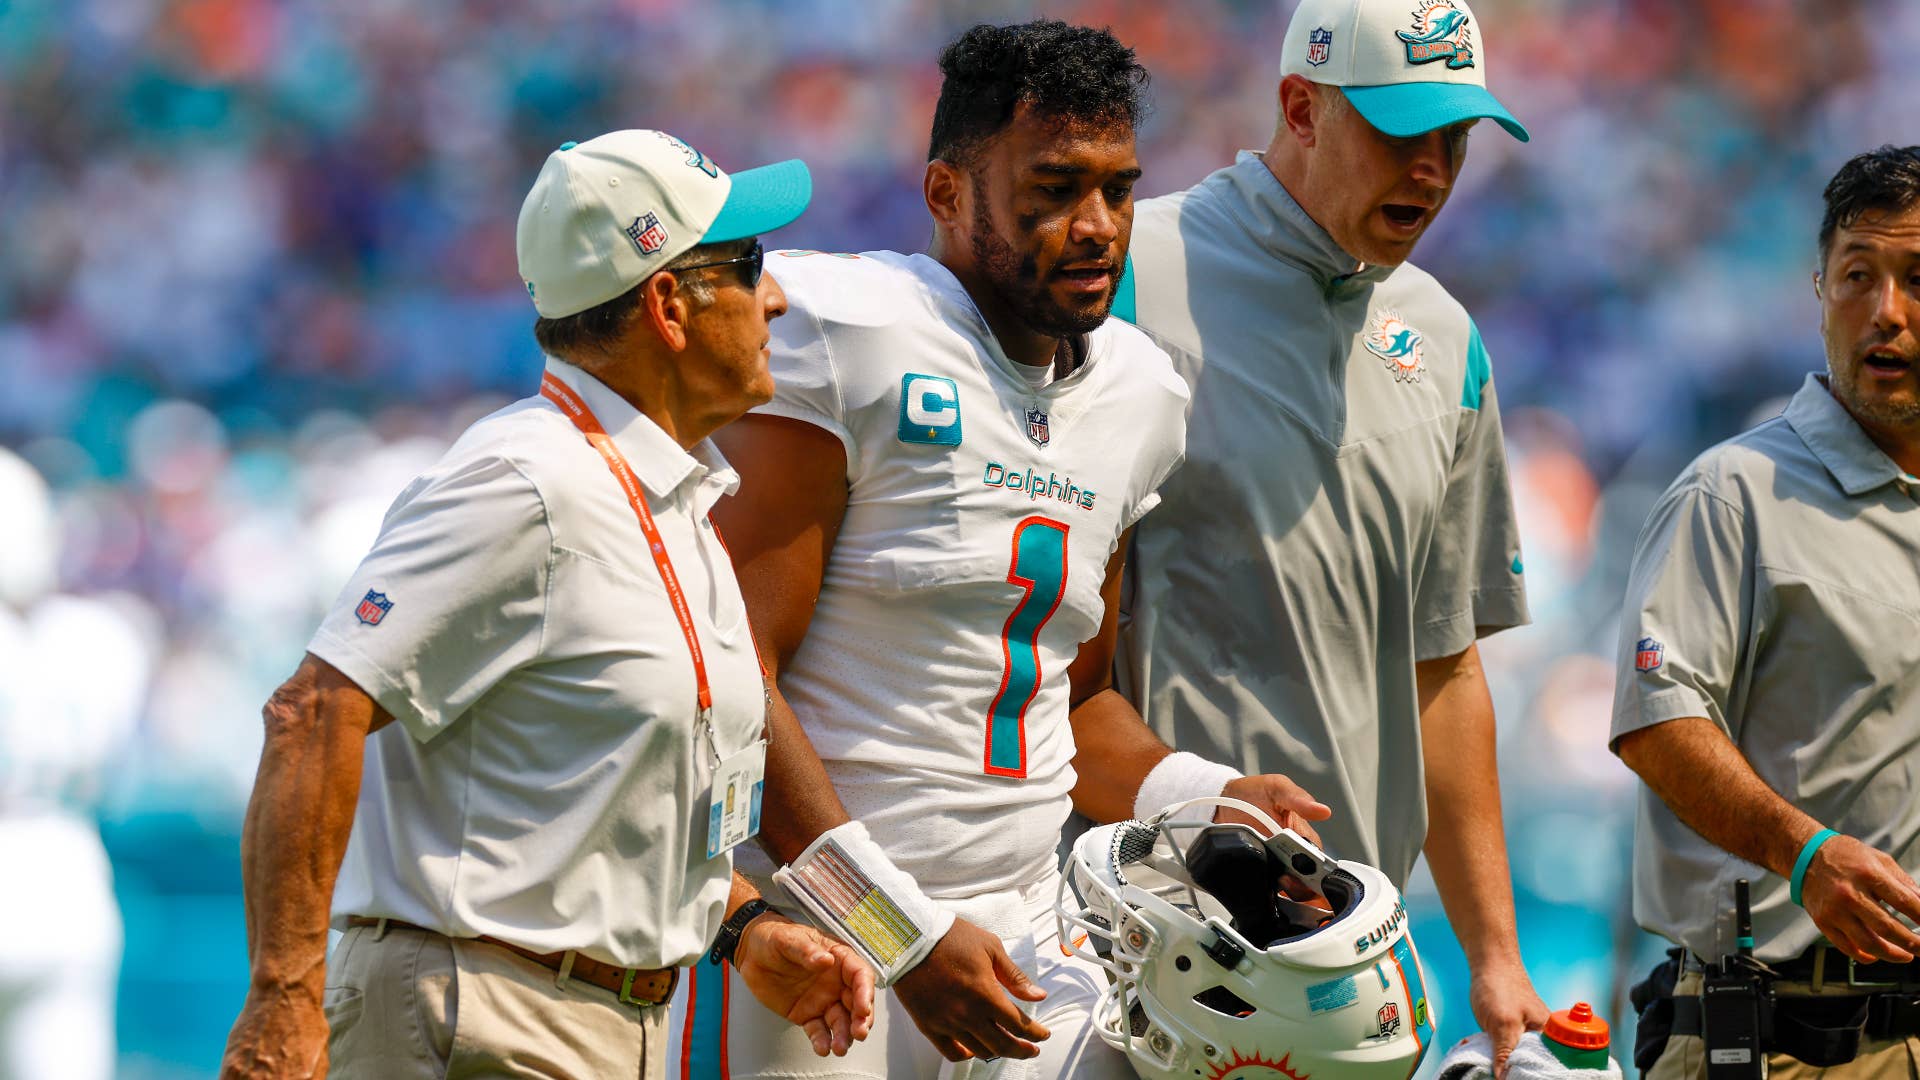 Tua Tagovailoa walks off the field with trainers following a play during the game between the Buffalo Bills and the Miami Dolphins.